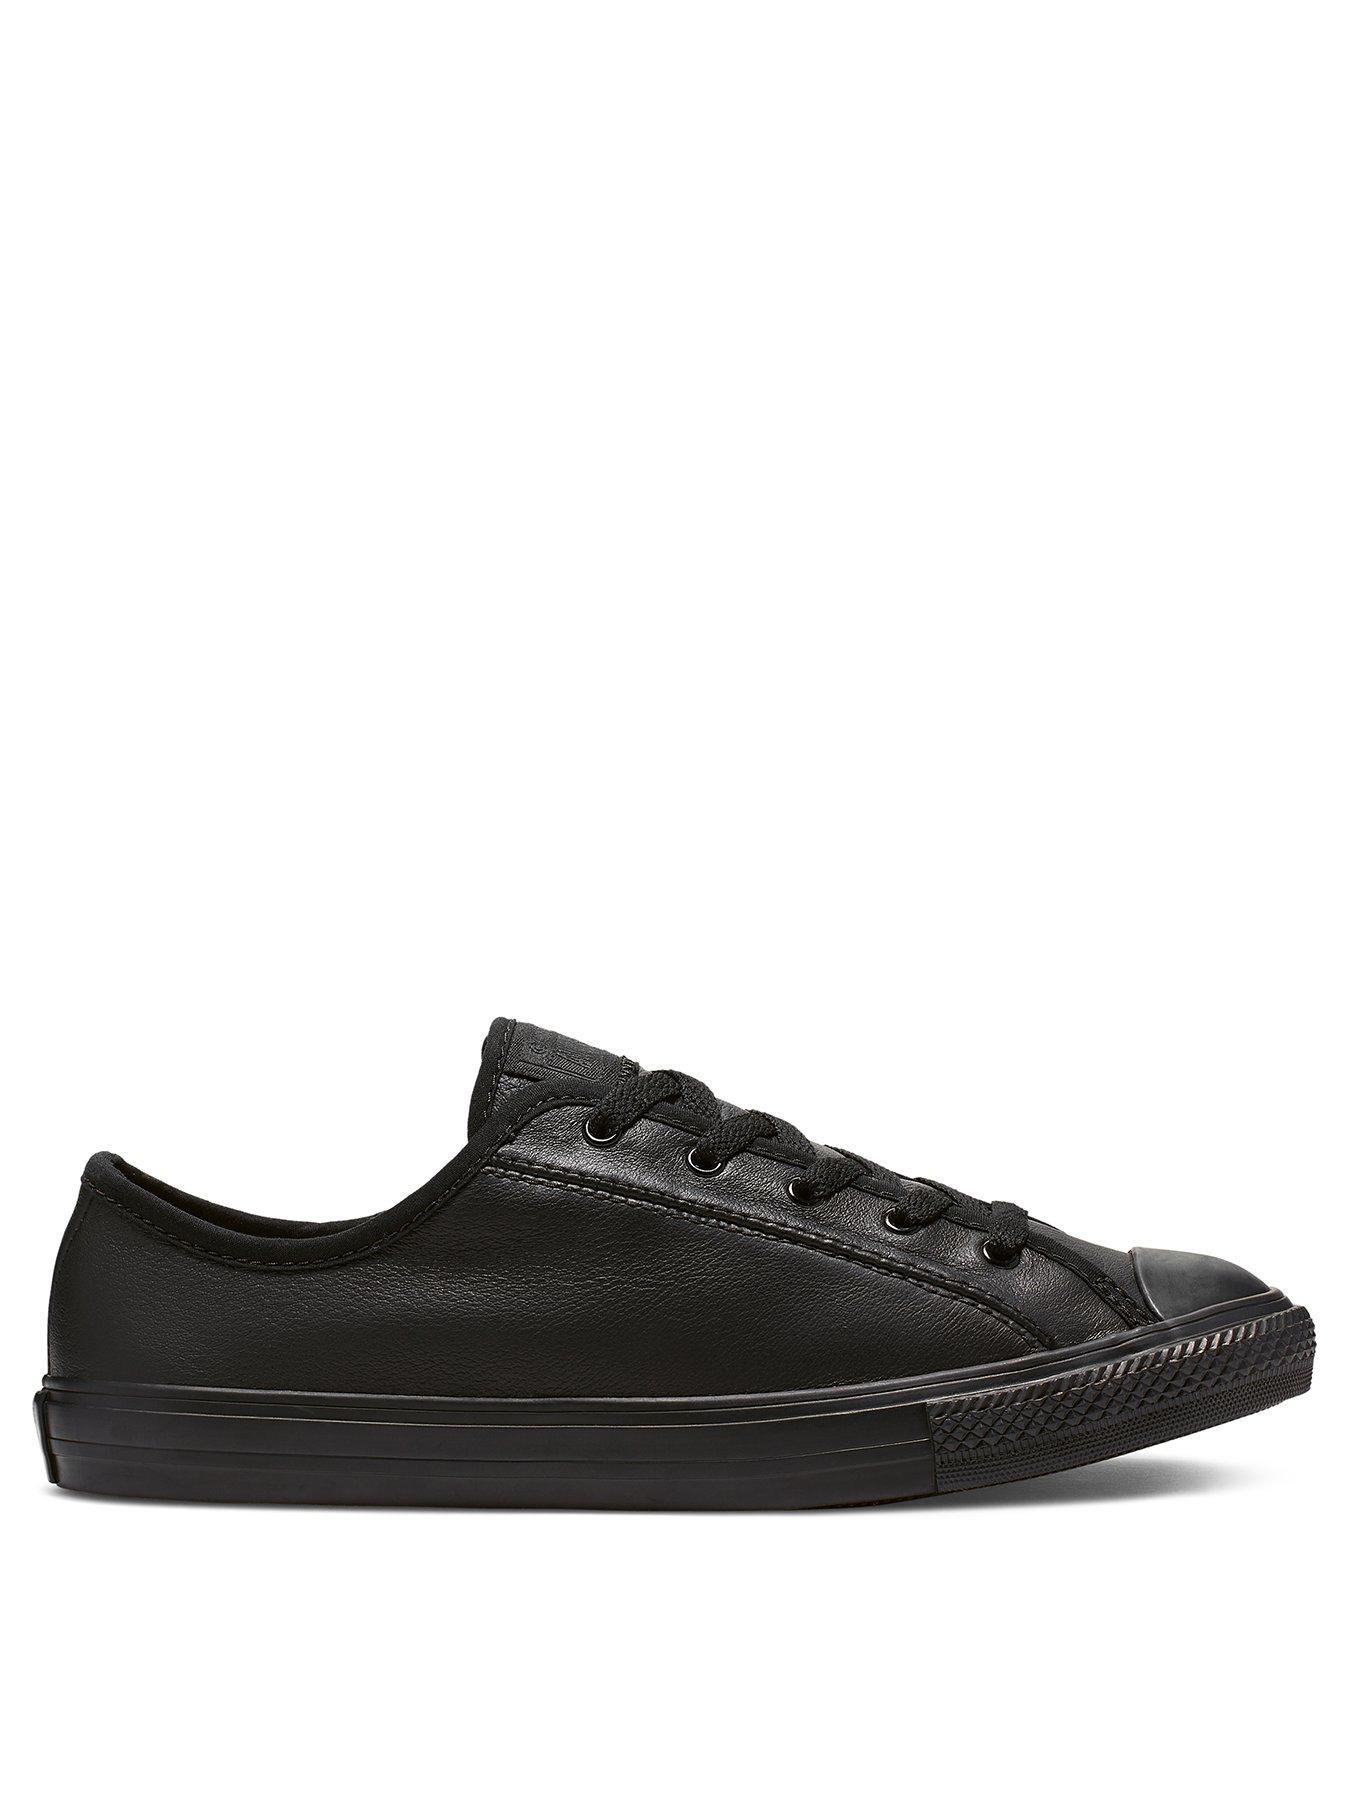 converse all star dainty black leather